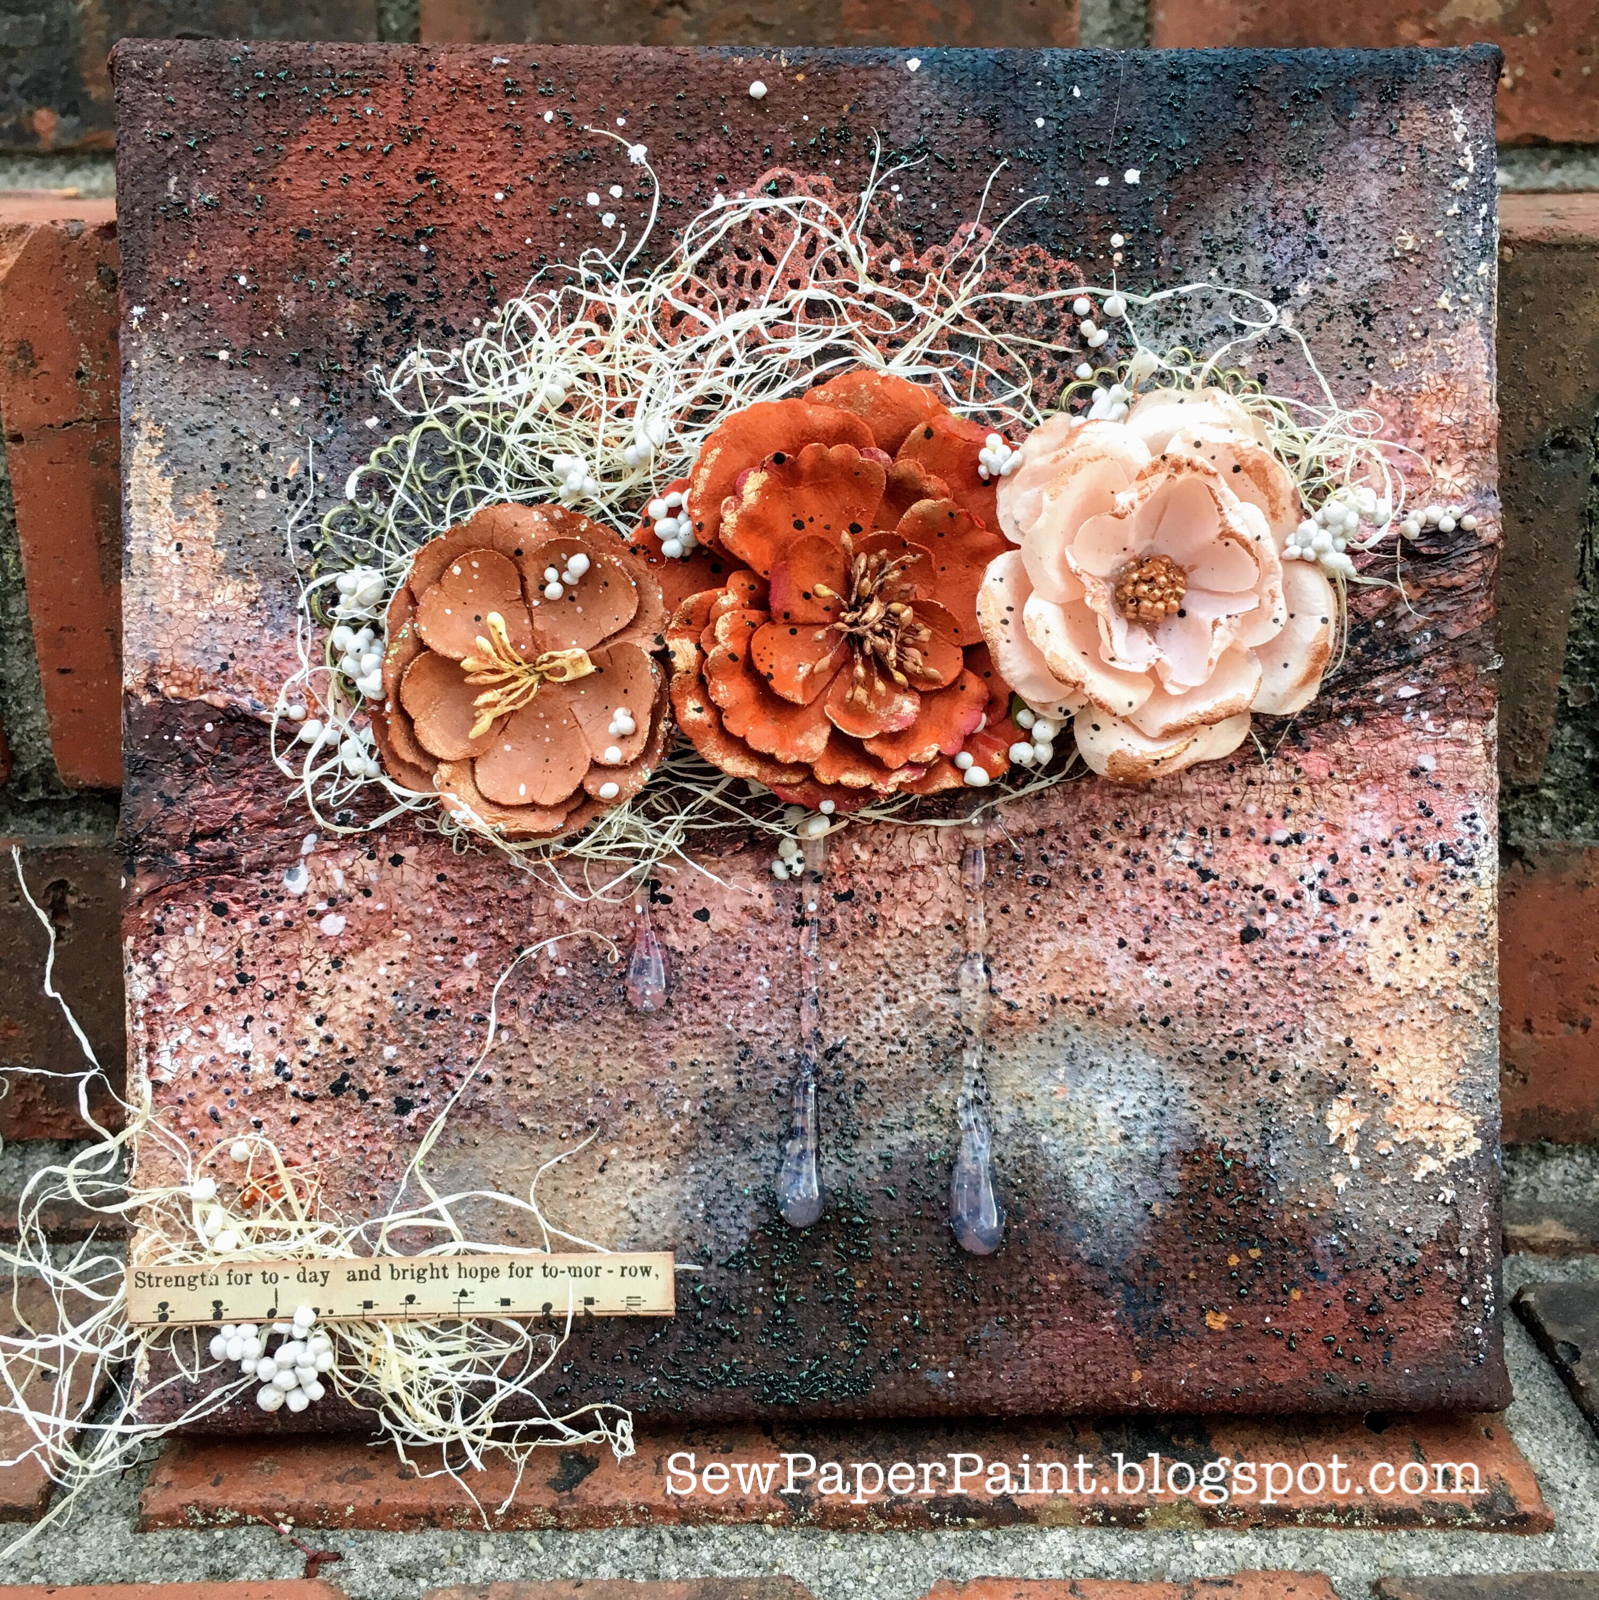 SewPaperPaint: Rusty Mixed Media Floral Canvas with Lindy's